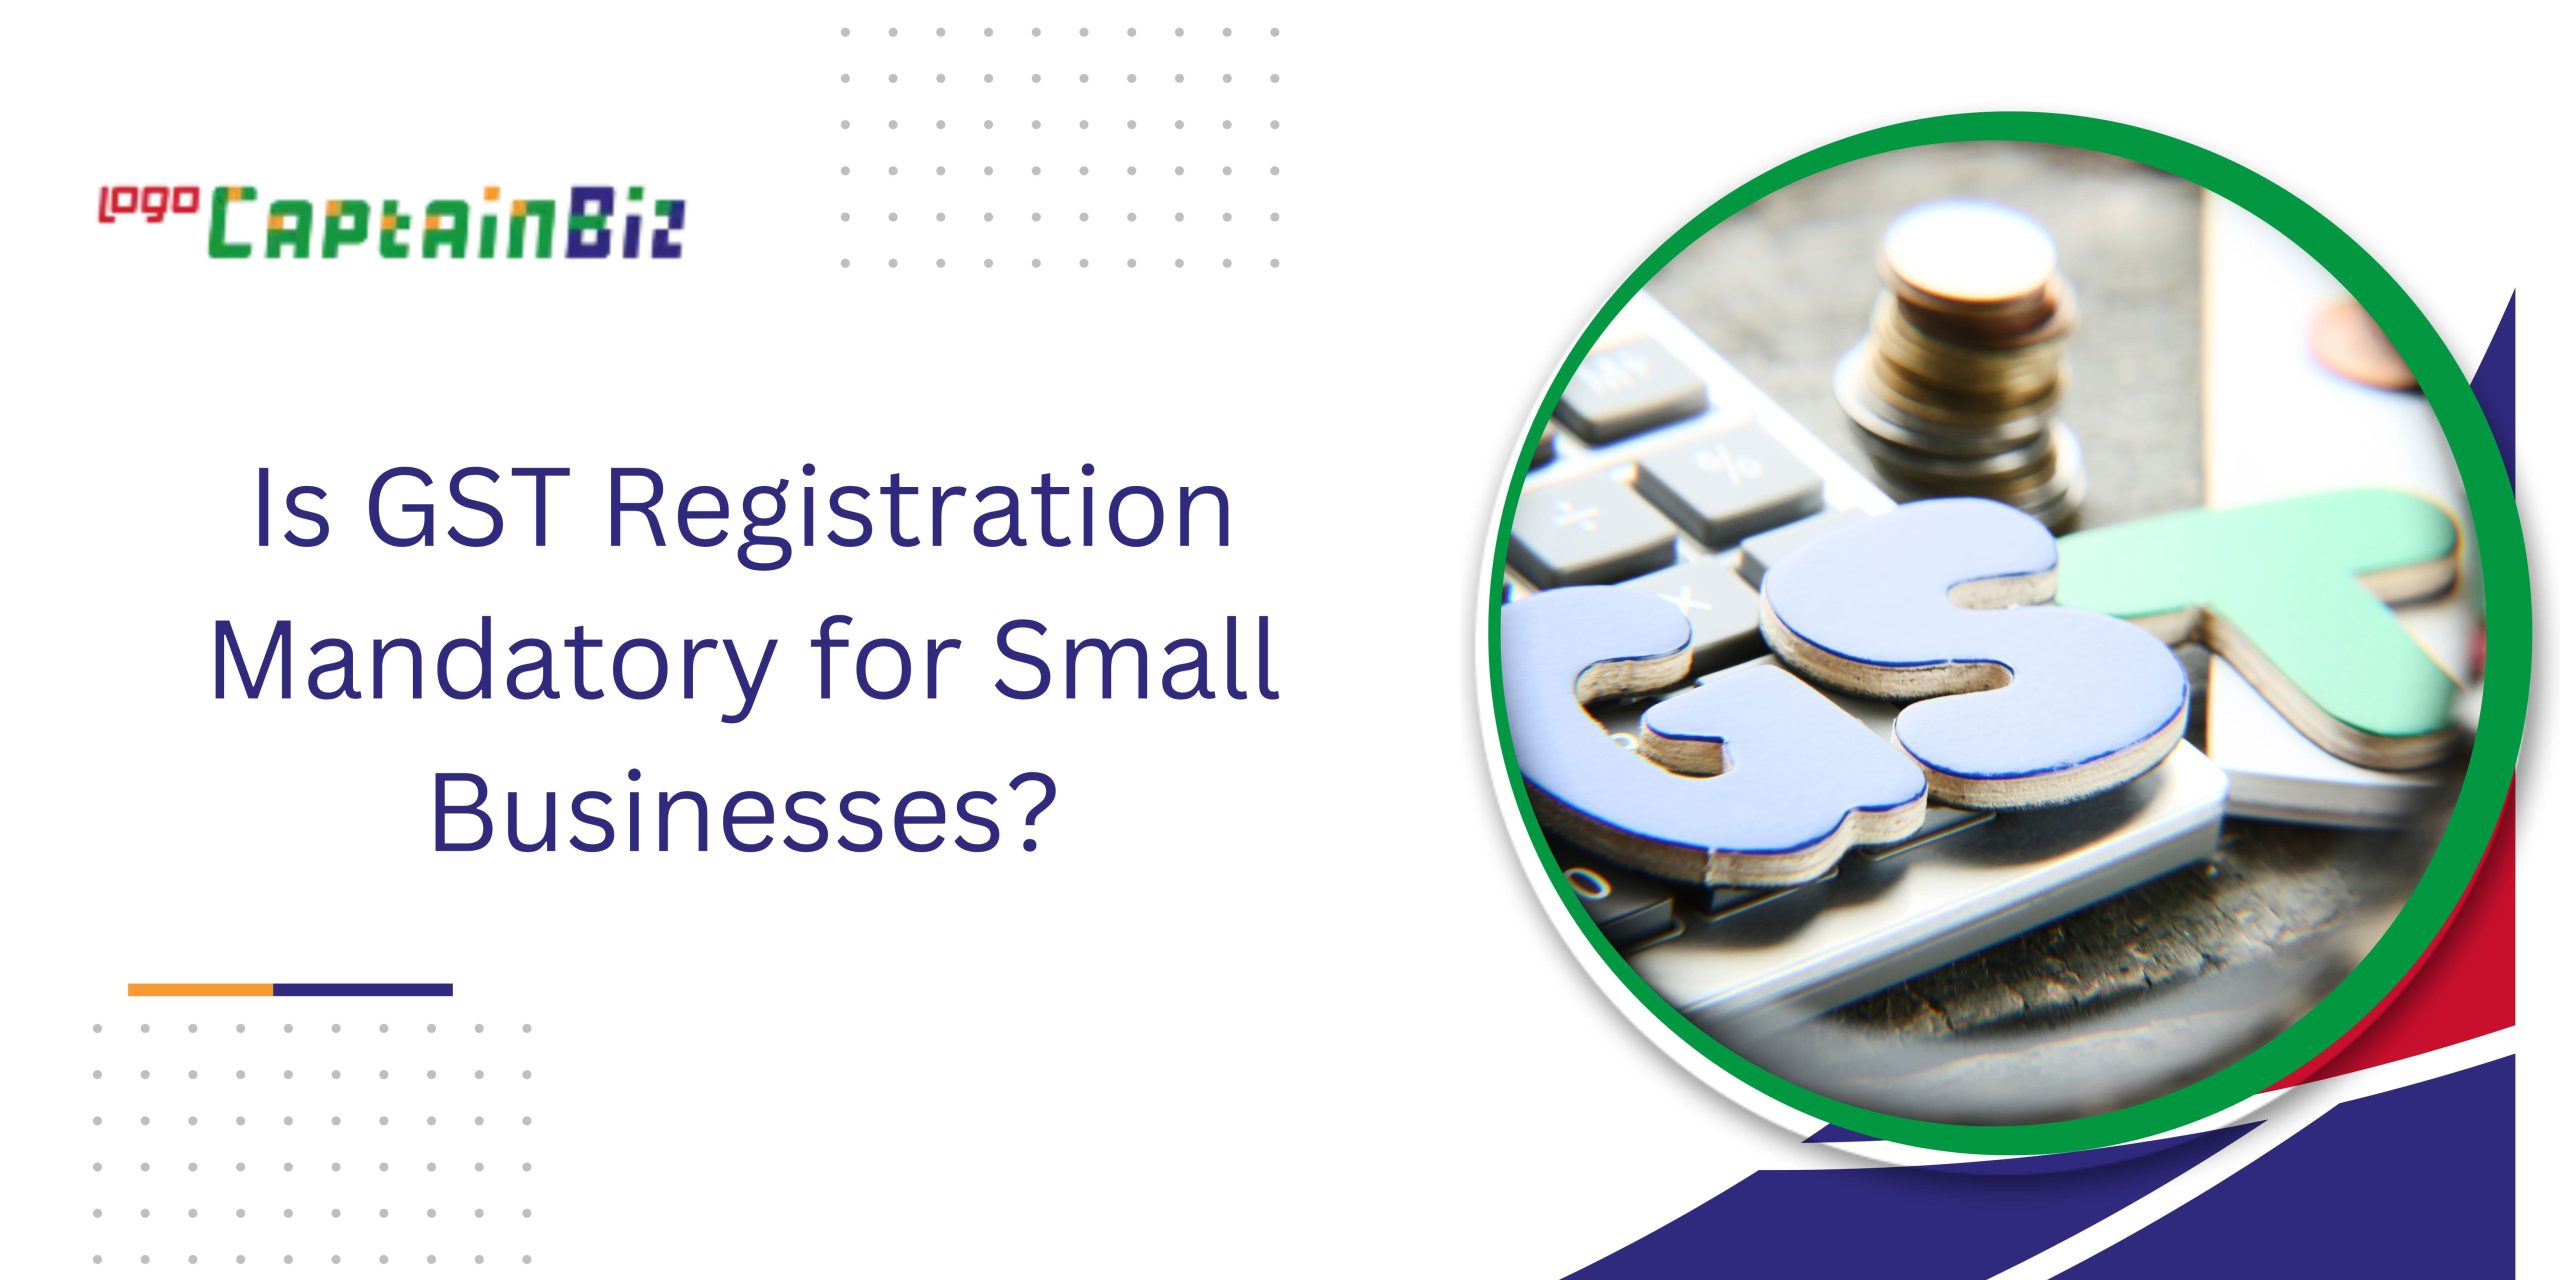 Is GST Registration Mandatory for Small Businesses?